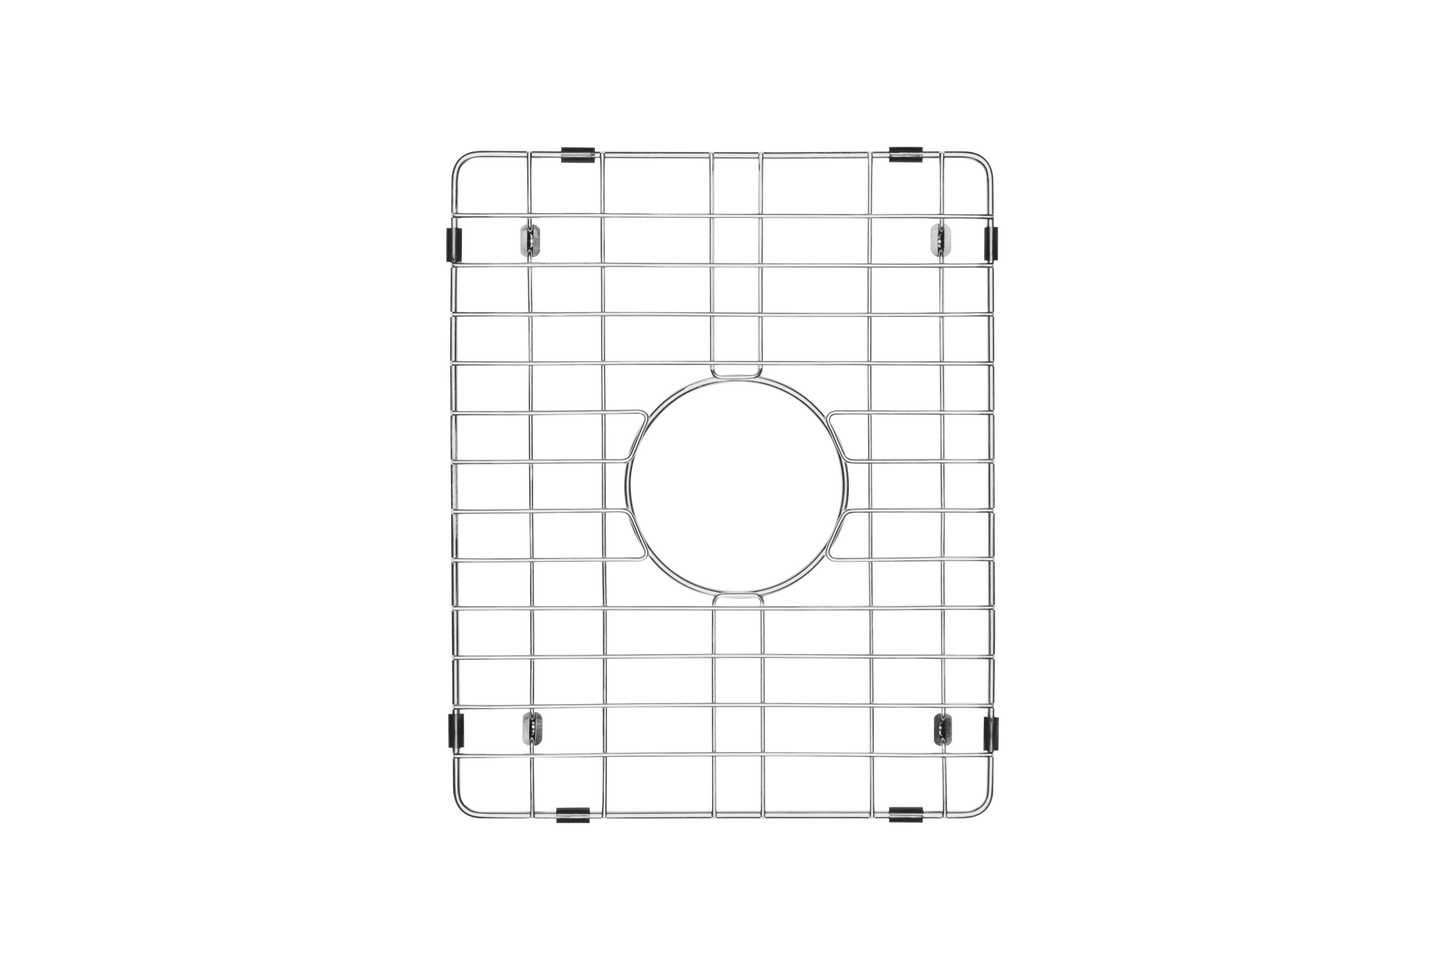 Double Narrow Offset Grid - Small Bowl